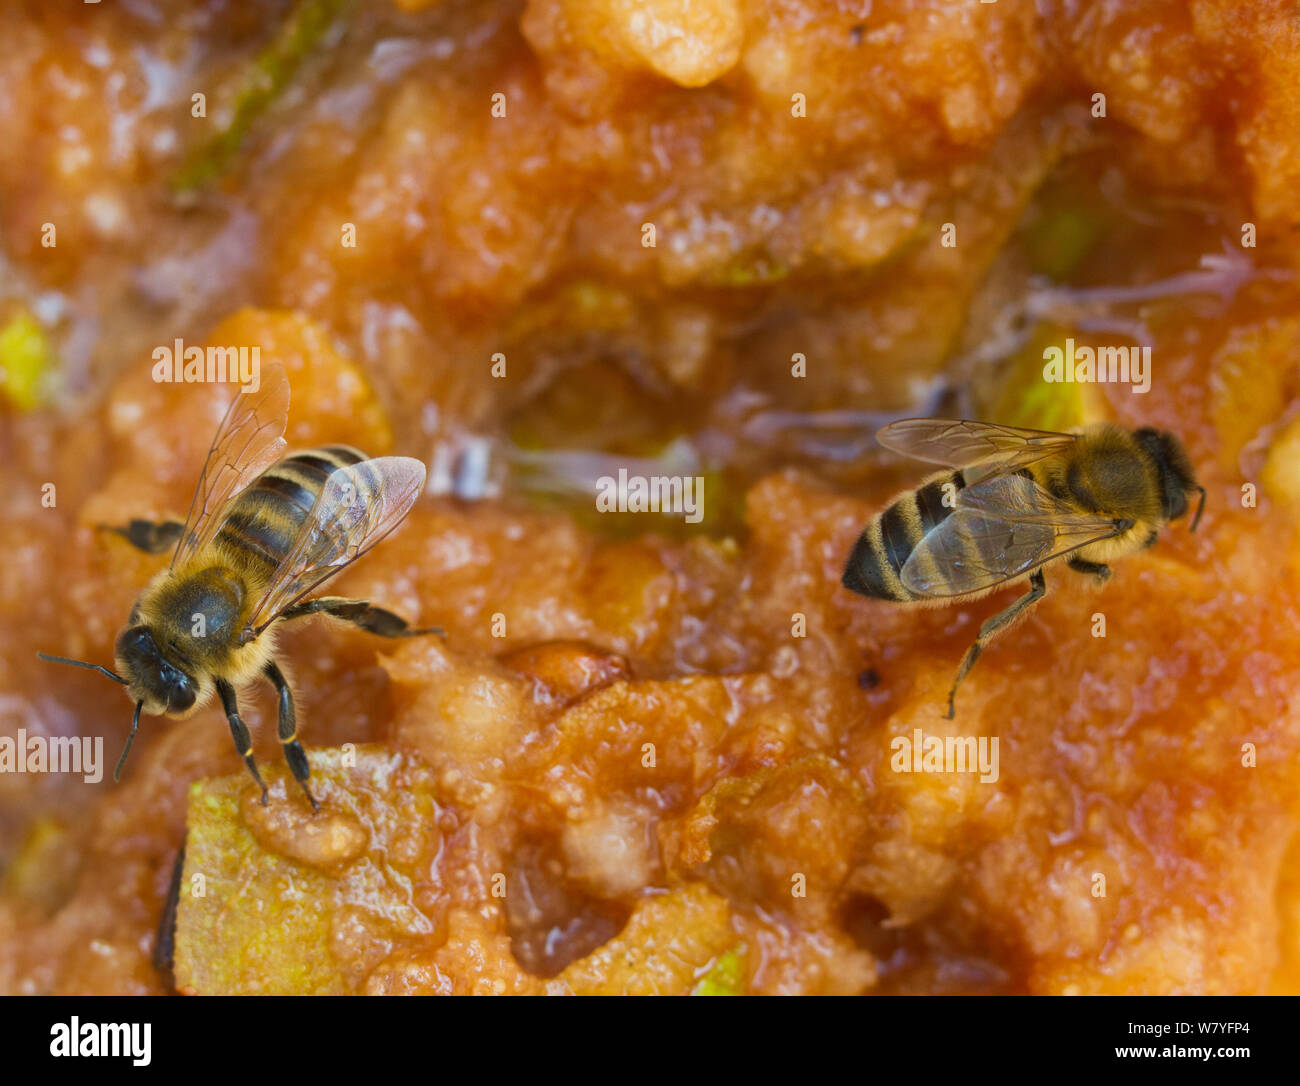 Honeybees (Apis mellifera) on perry mash  (squashed pears as part of the process of making perry, or pear cider) attracted by the sugar content,  Awre, Severn estuary, Gloucestershire, UK, September. Stock Photo